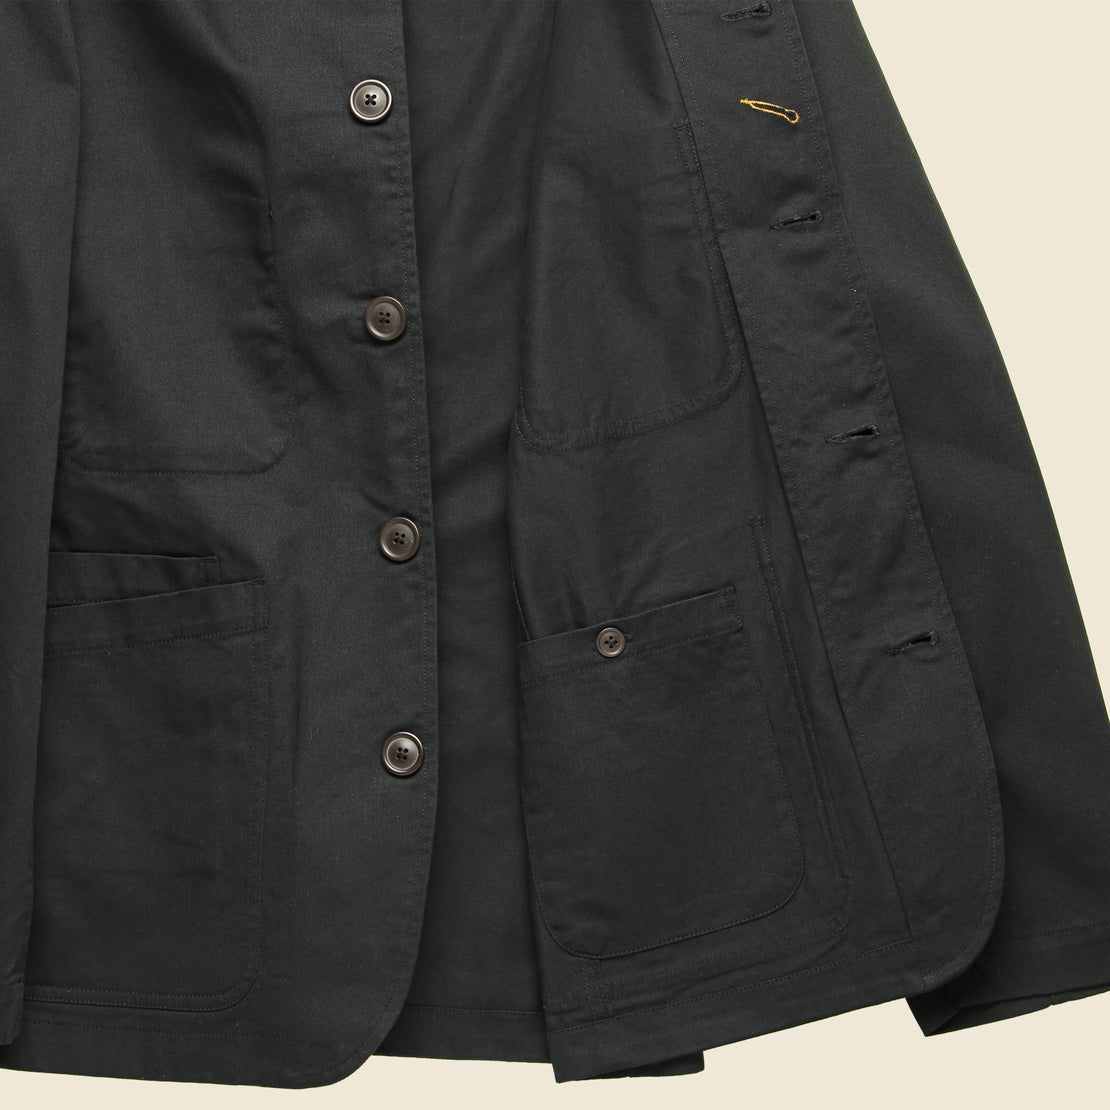 Twill Bakers Jacket - Black - Universal Works - STAG Provisions - Outerwear - Shirt Jacket